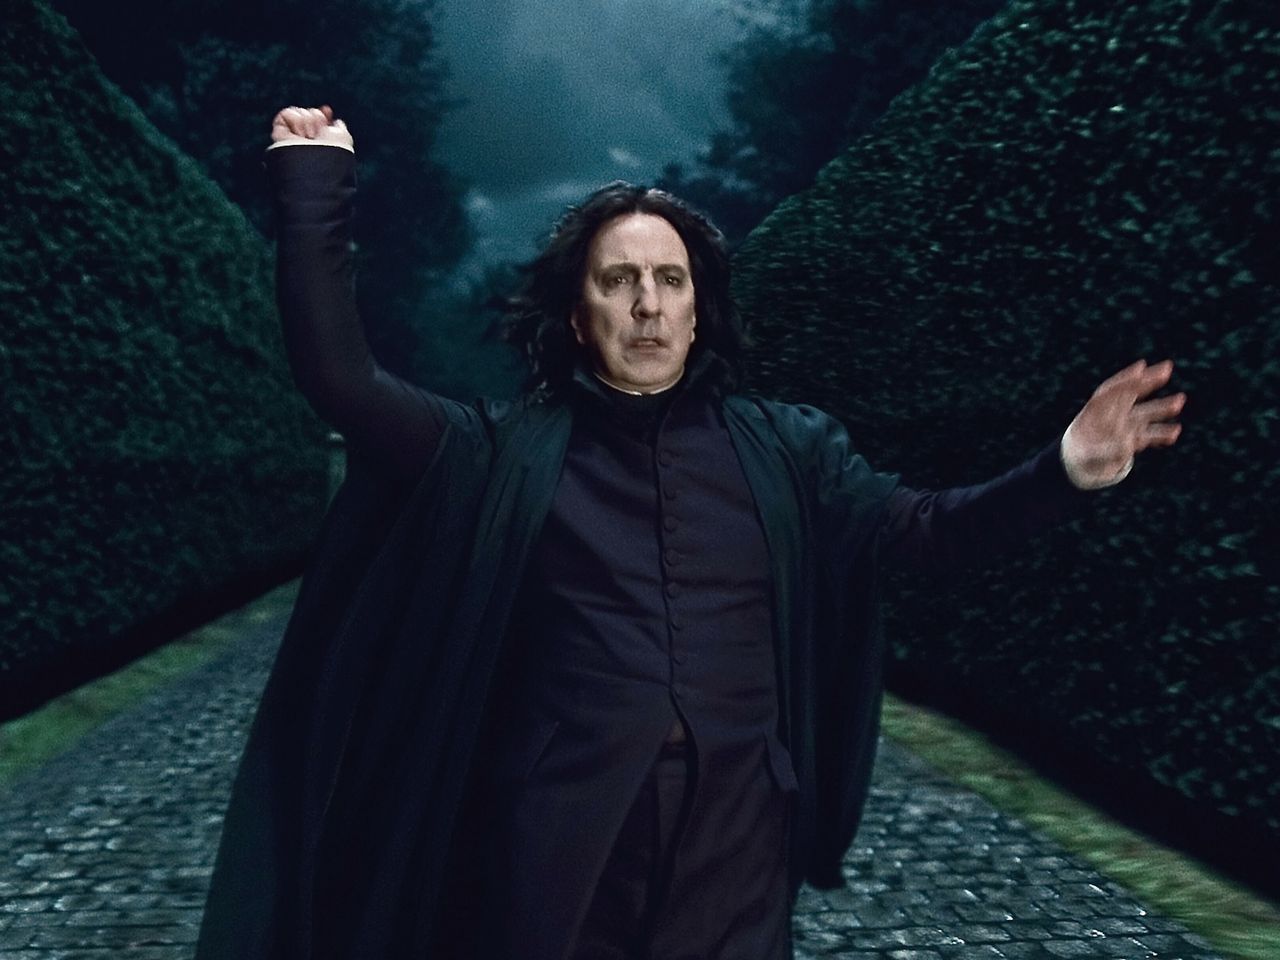 Thanks to the role of Snape, he will remain forever in the hearts of the viewers.